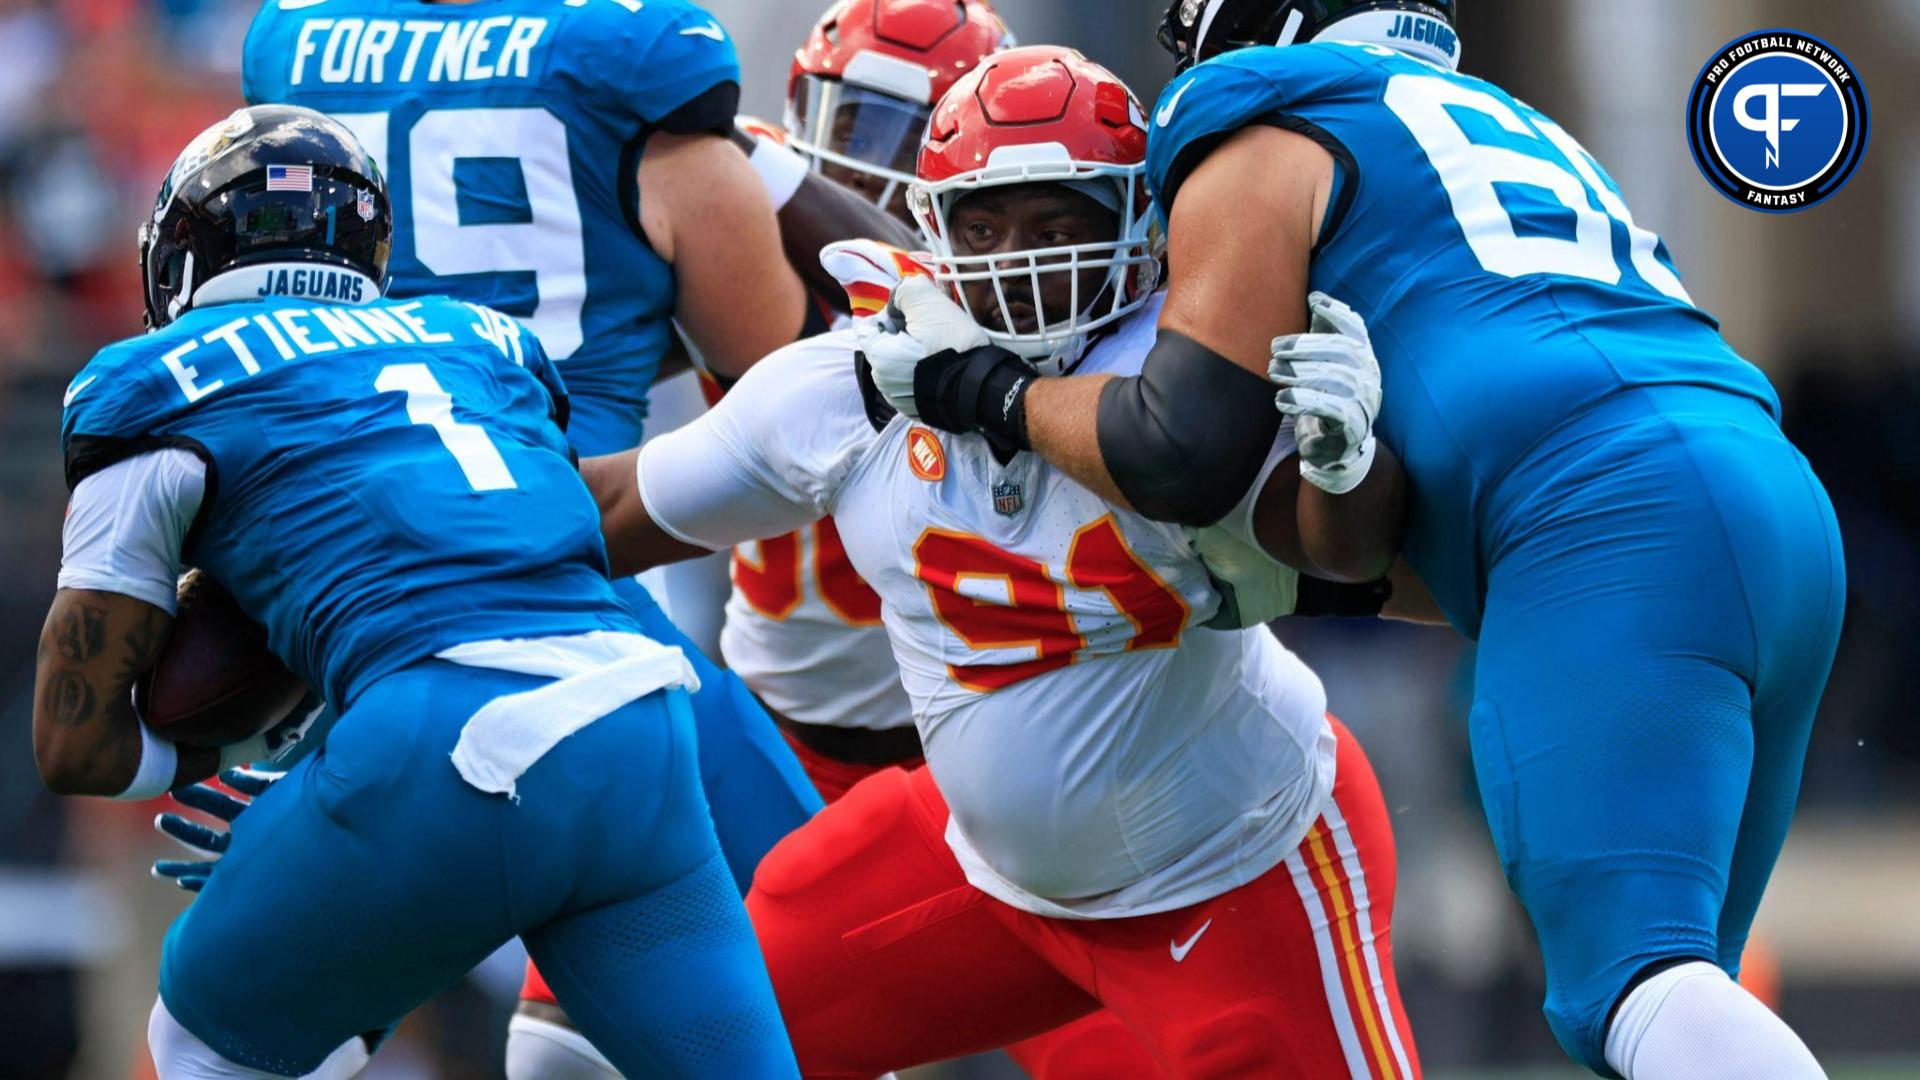 Fantasy Football Week 3 DST Rankings: PFN Consensus Top Options Include  Kansas City Chiefs, Jacksonville Jaguars, and Others